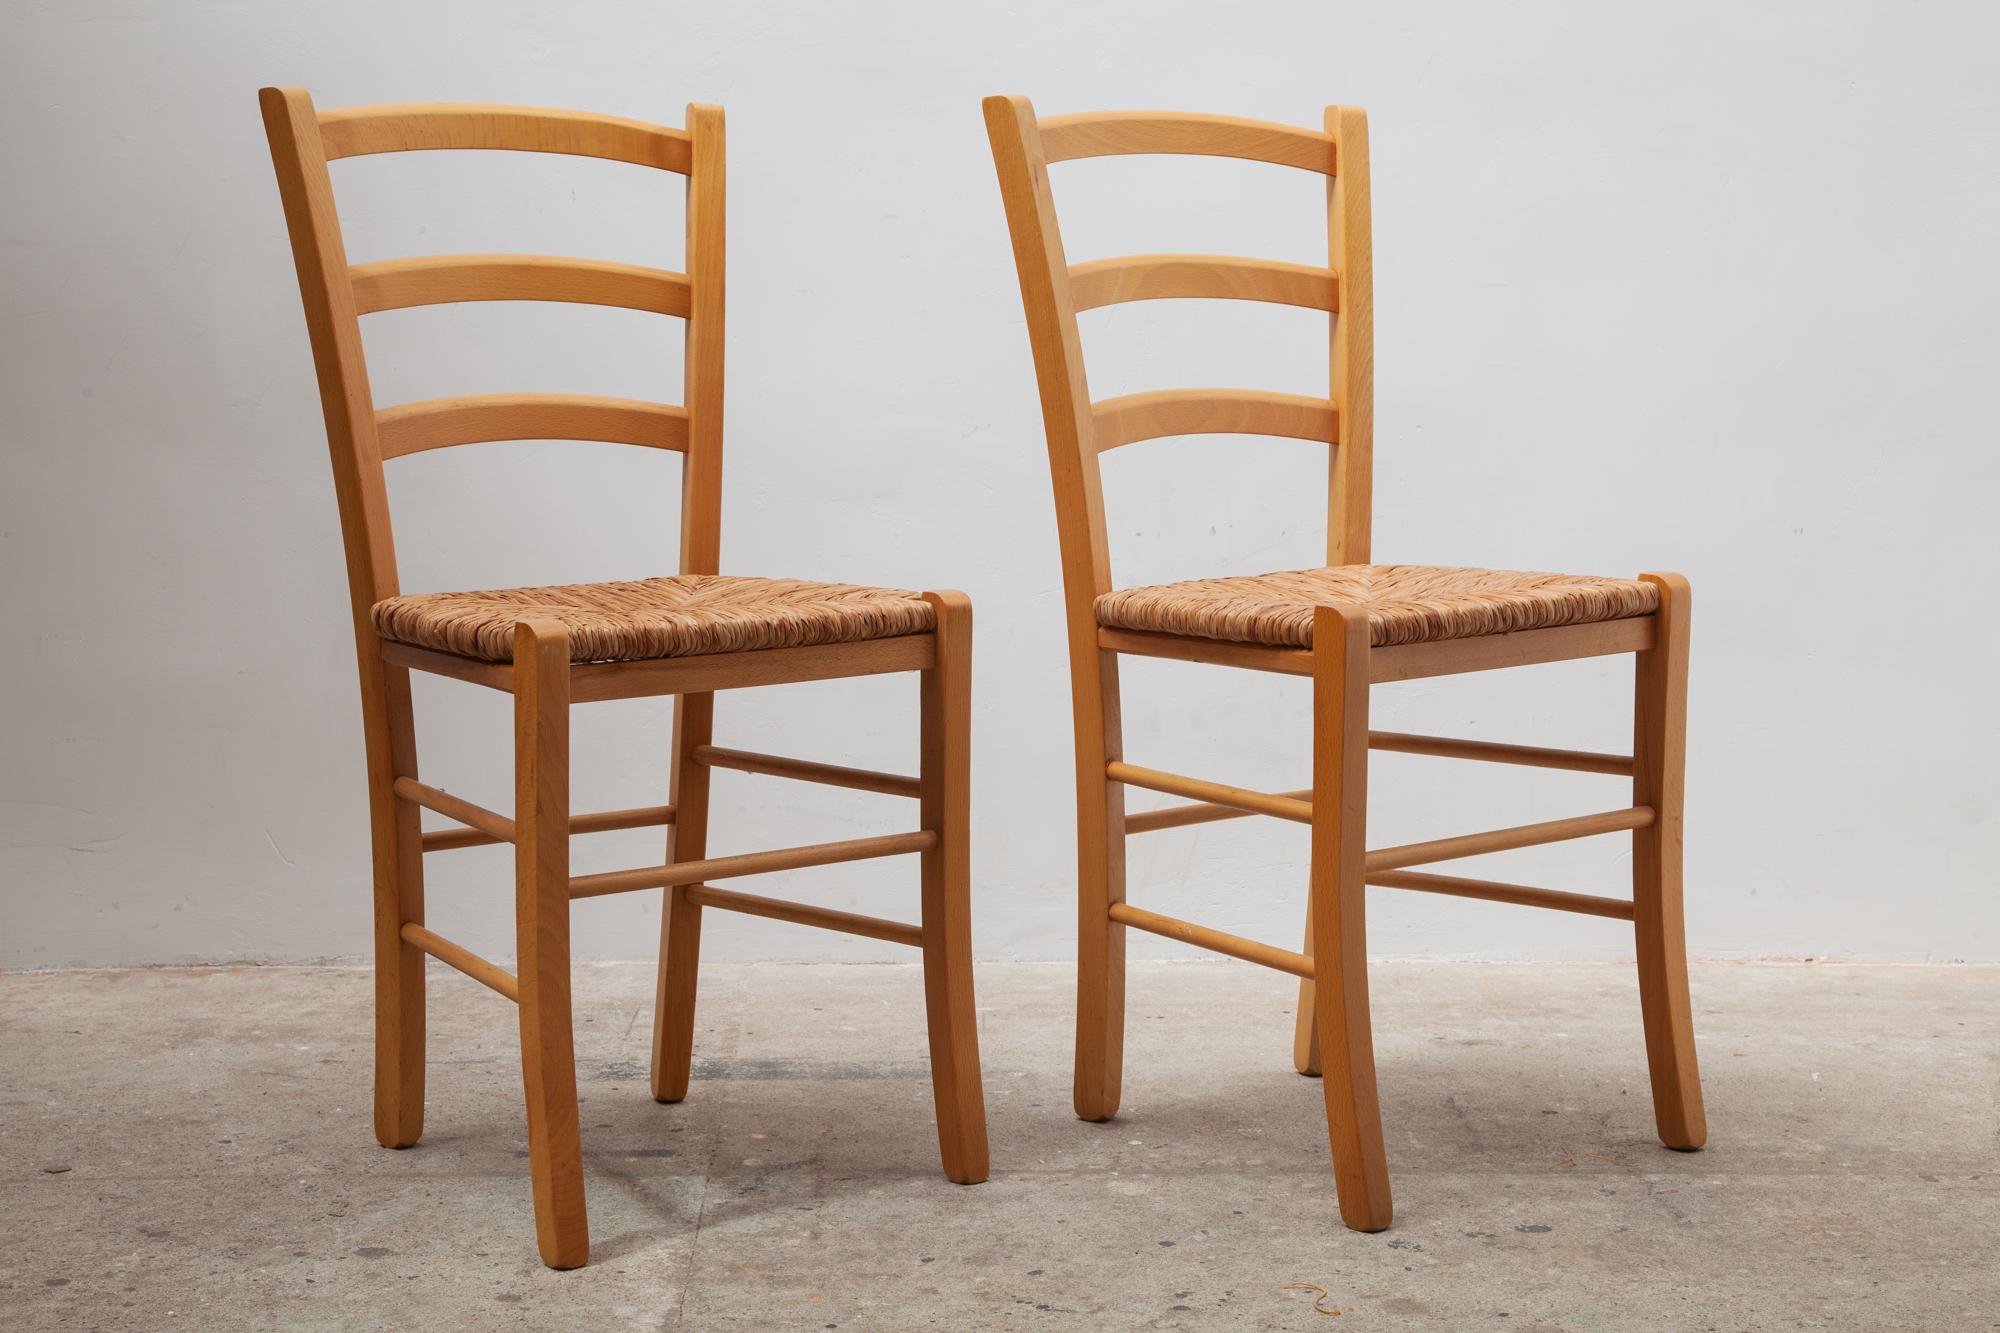 Vintage midcentury chairs with solid wooden frames and woven rattan seats.